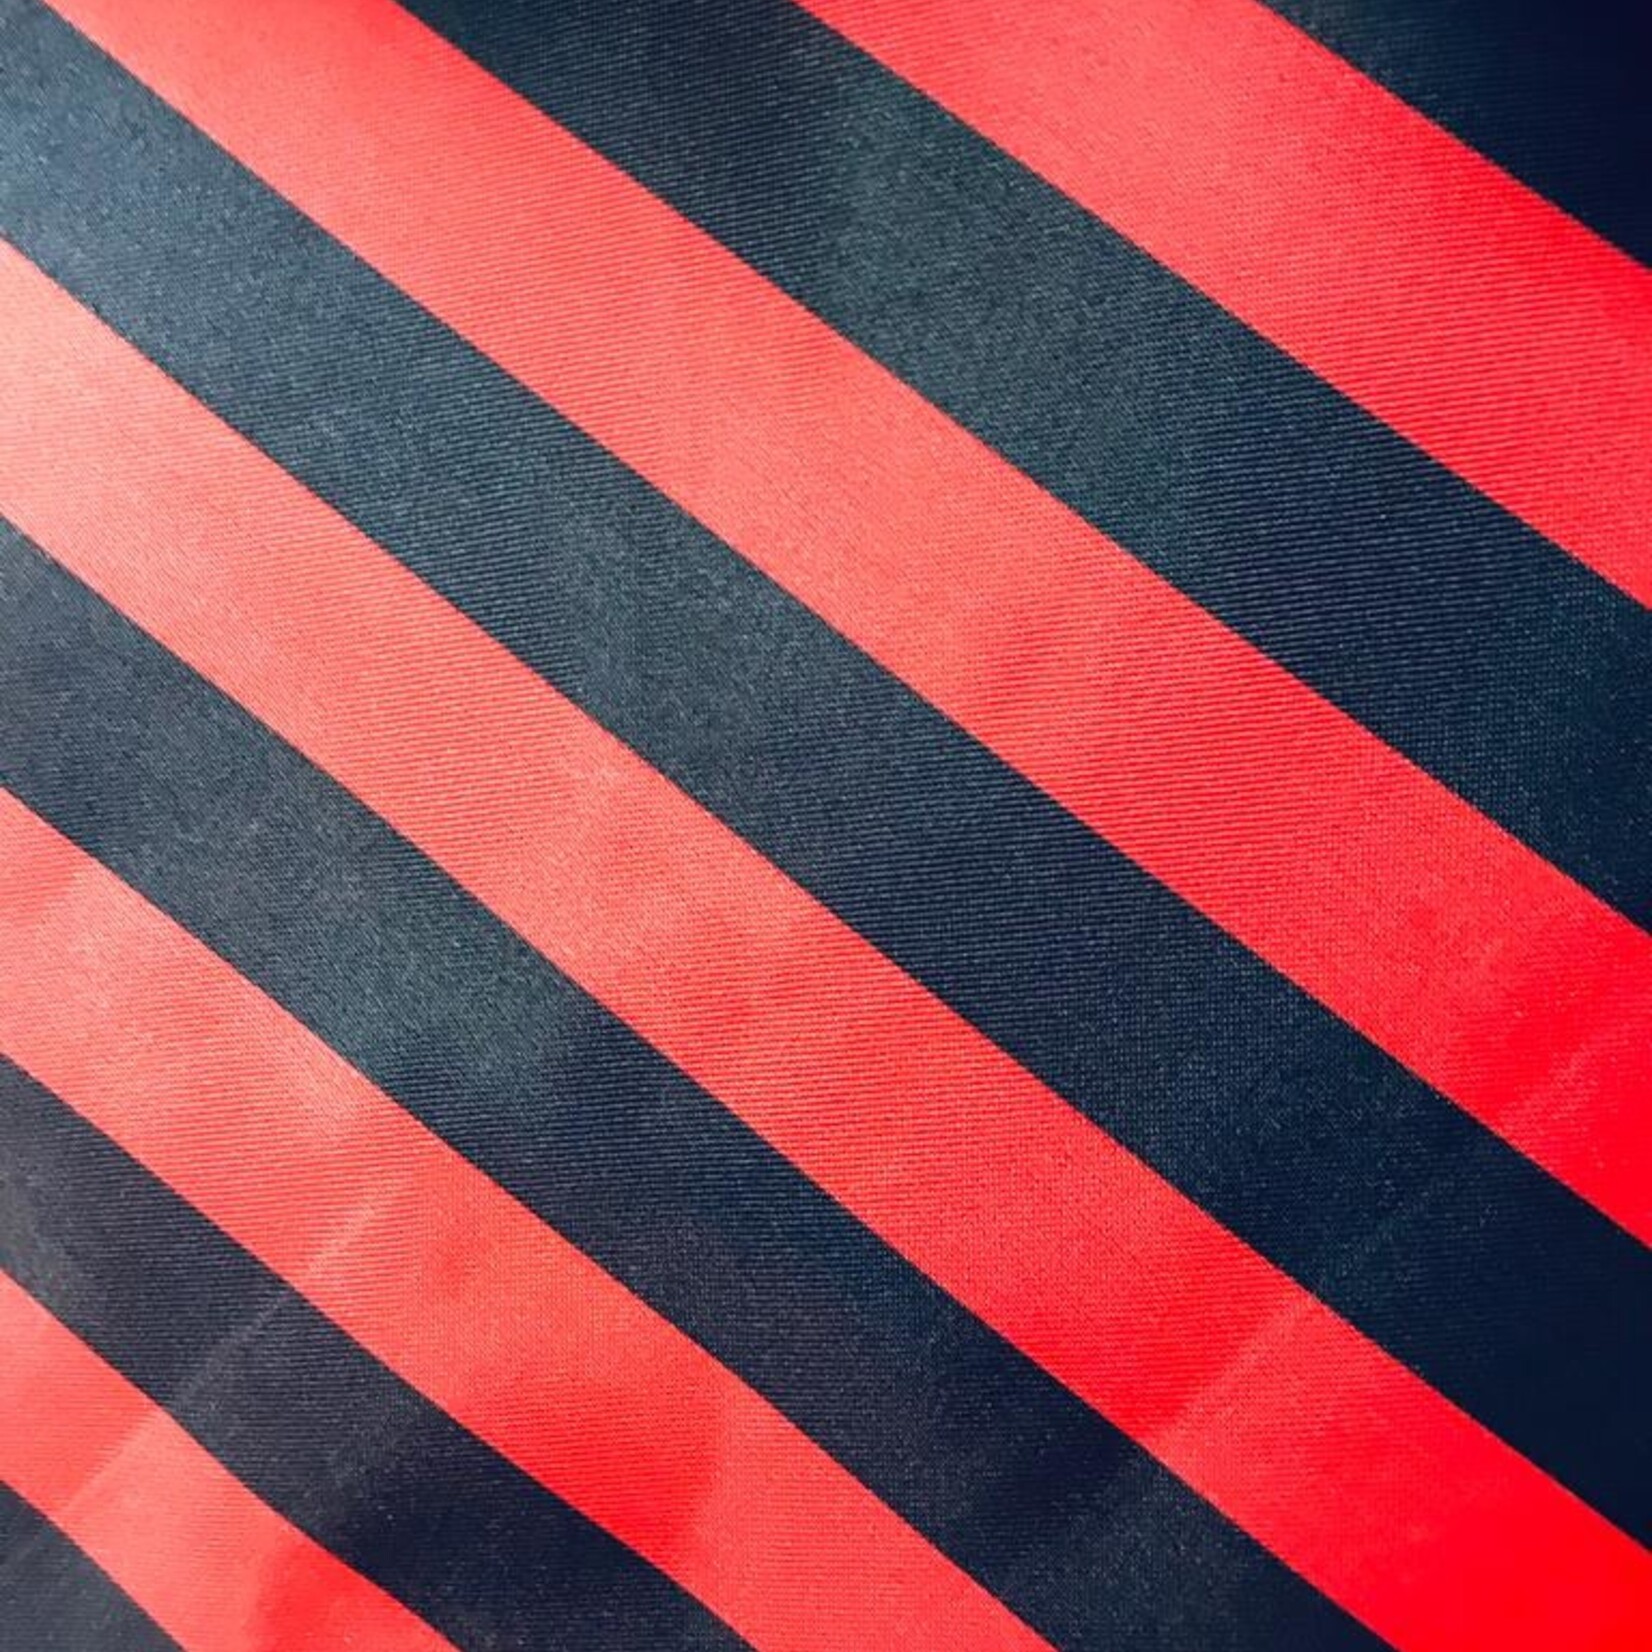 Satin Polyester 58 - 60 Inches Striped - Red & Black